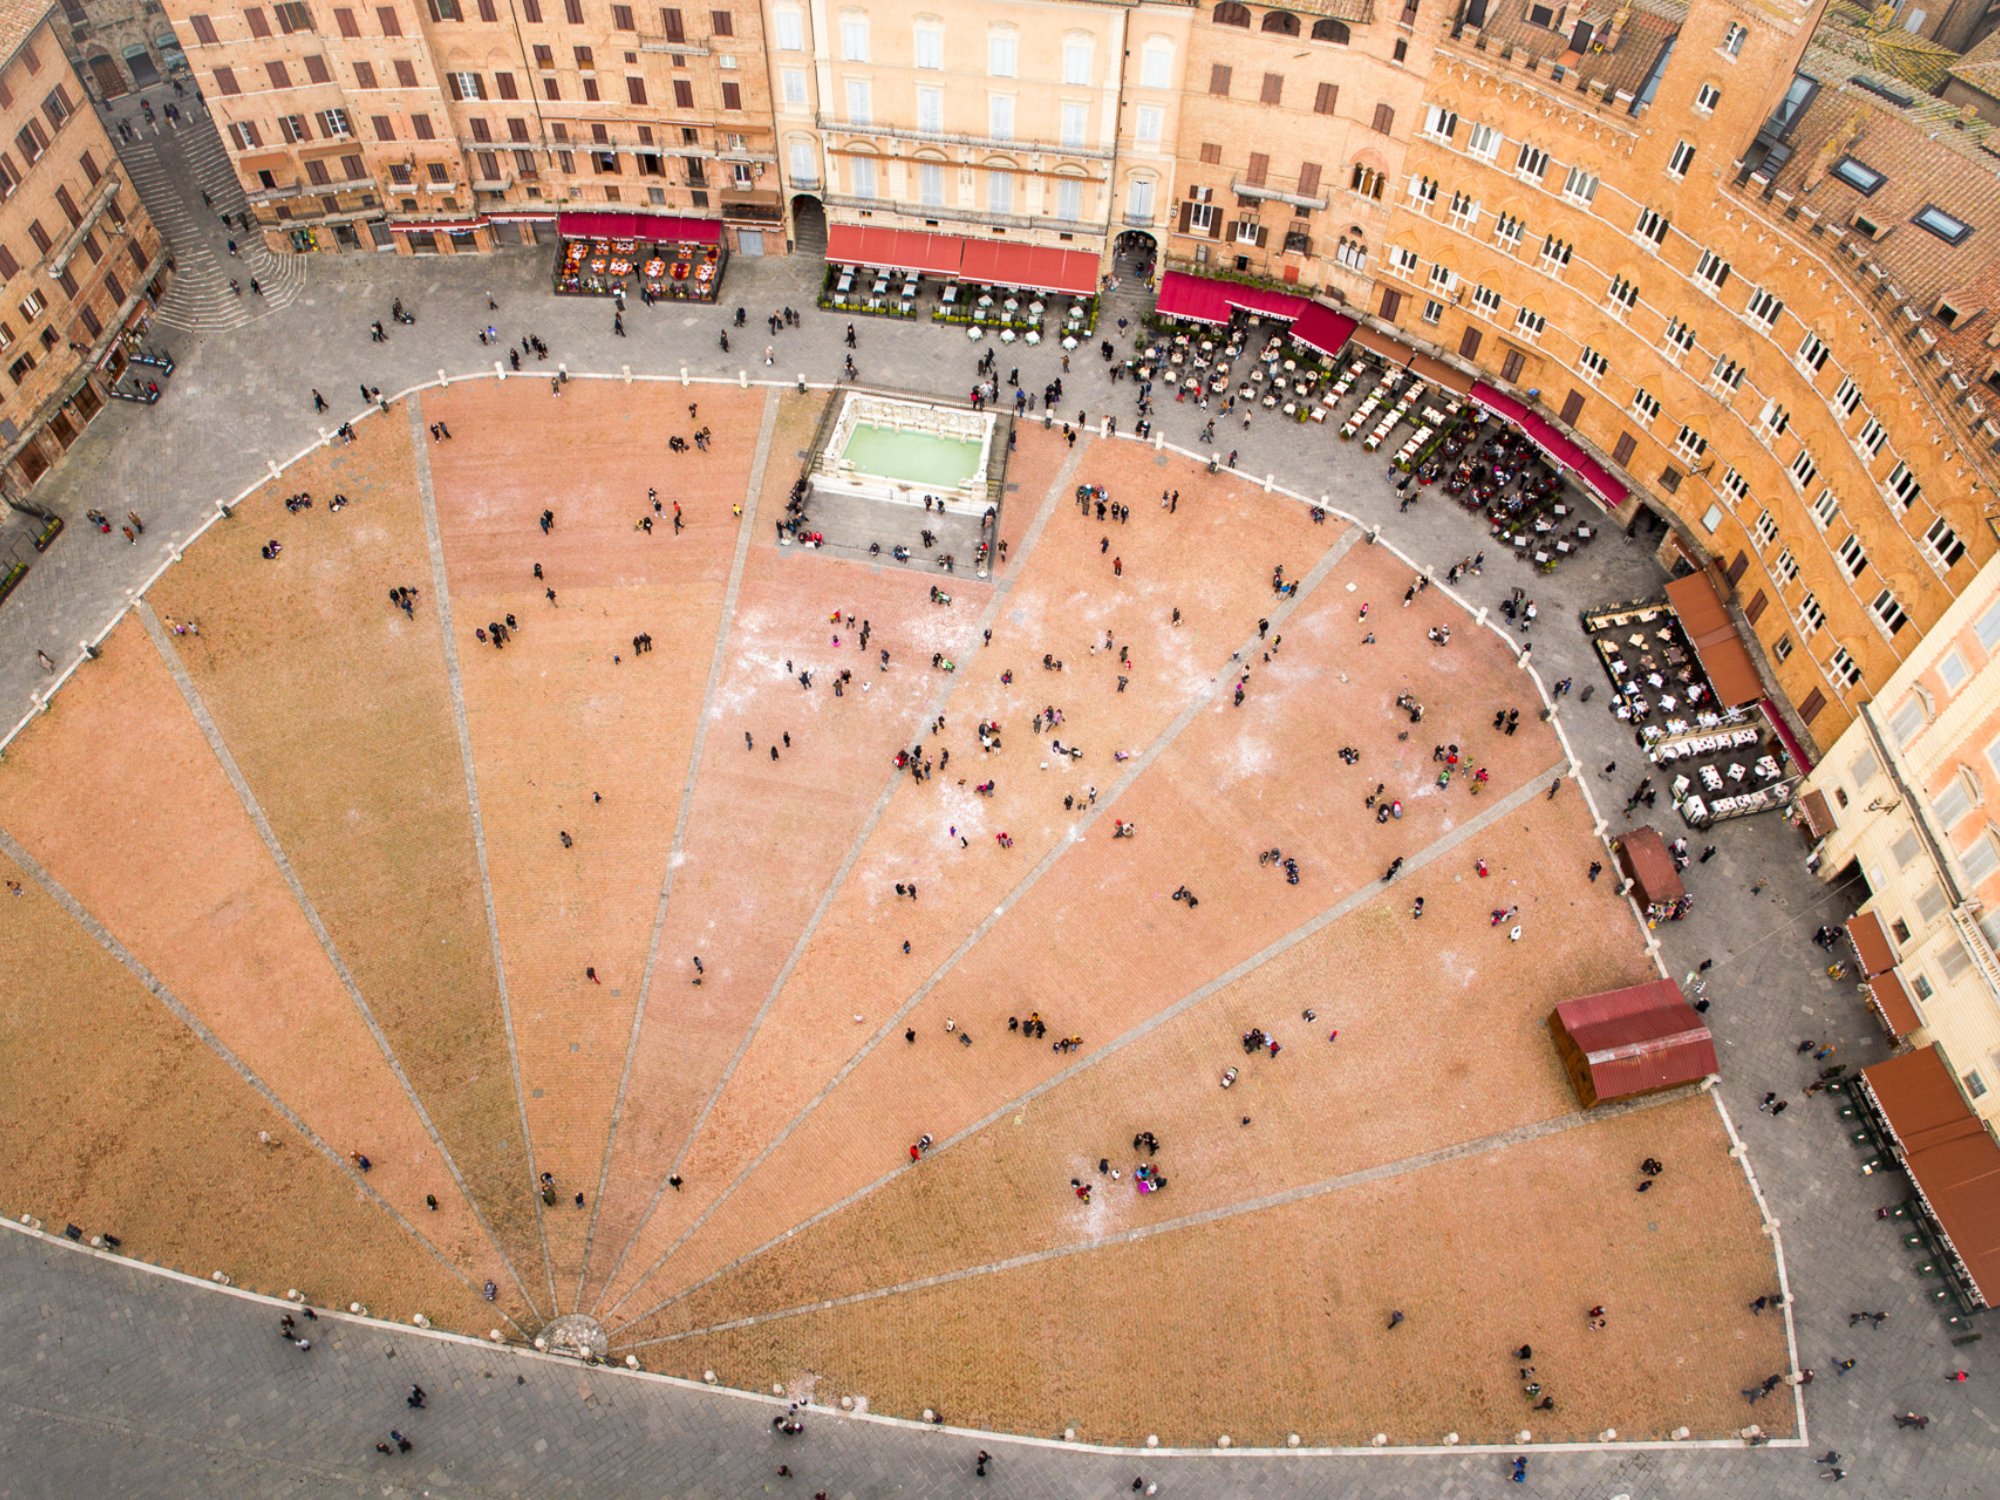 Piazza del Campo view from the Torre del Mangia